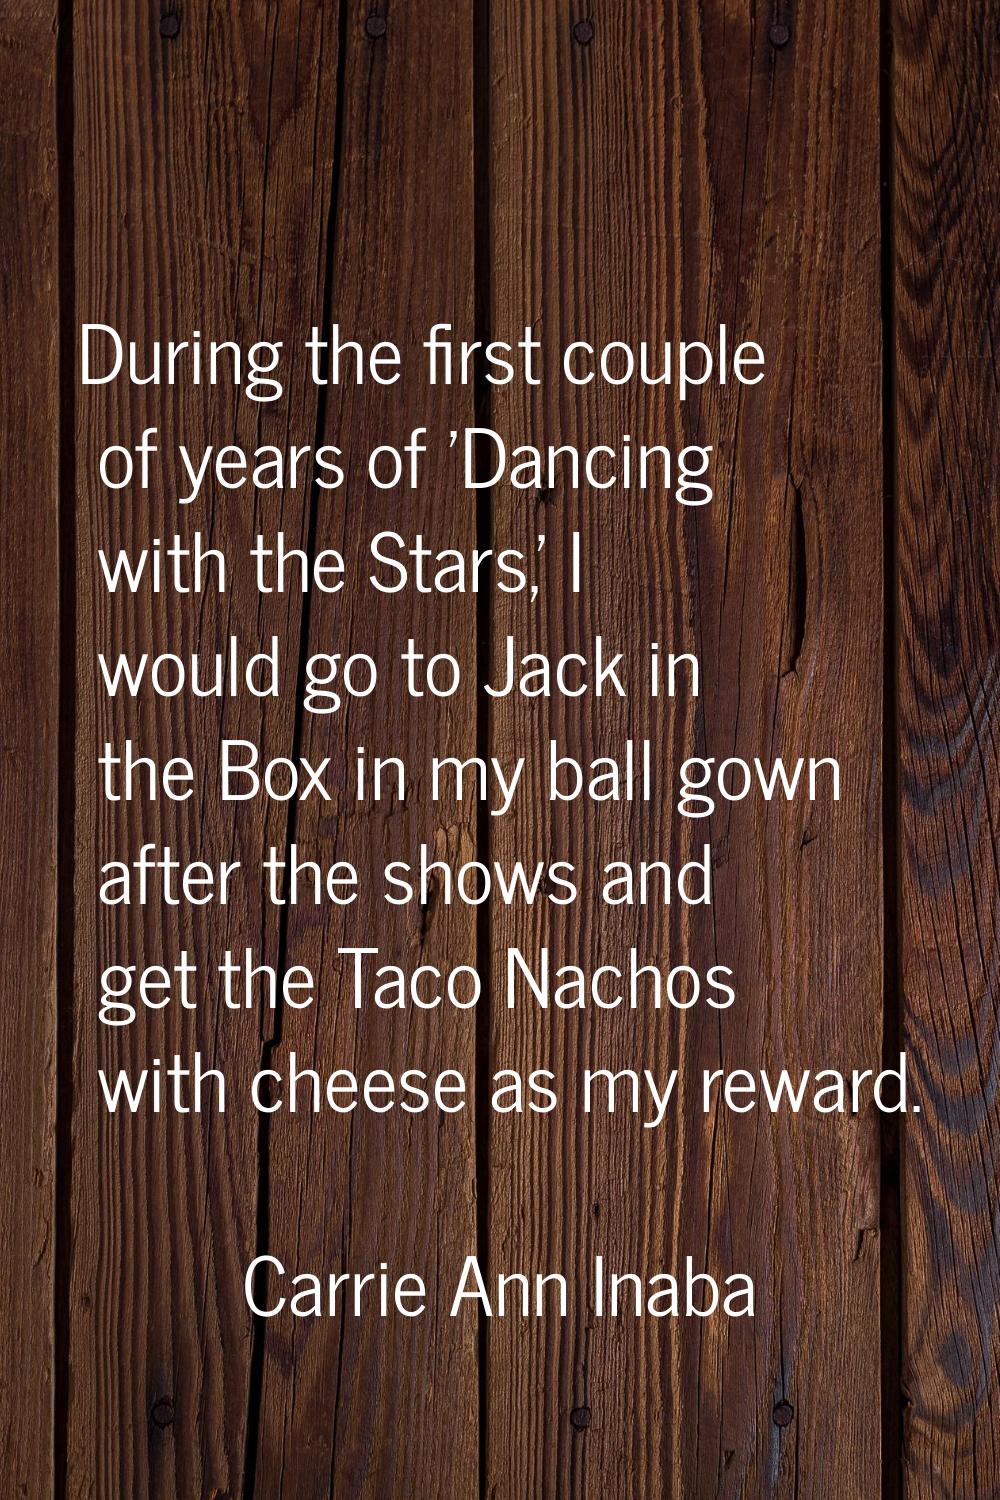 During the first couple of years of 'Dancing with the Stars,' I would go to Jack in the Box in my b